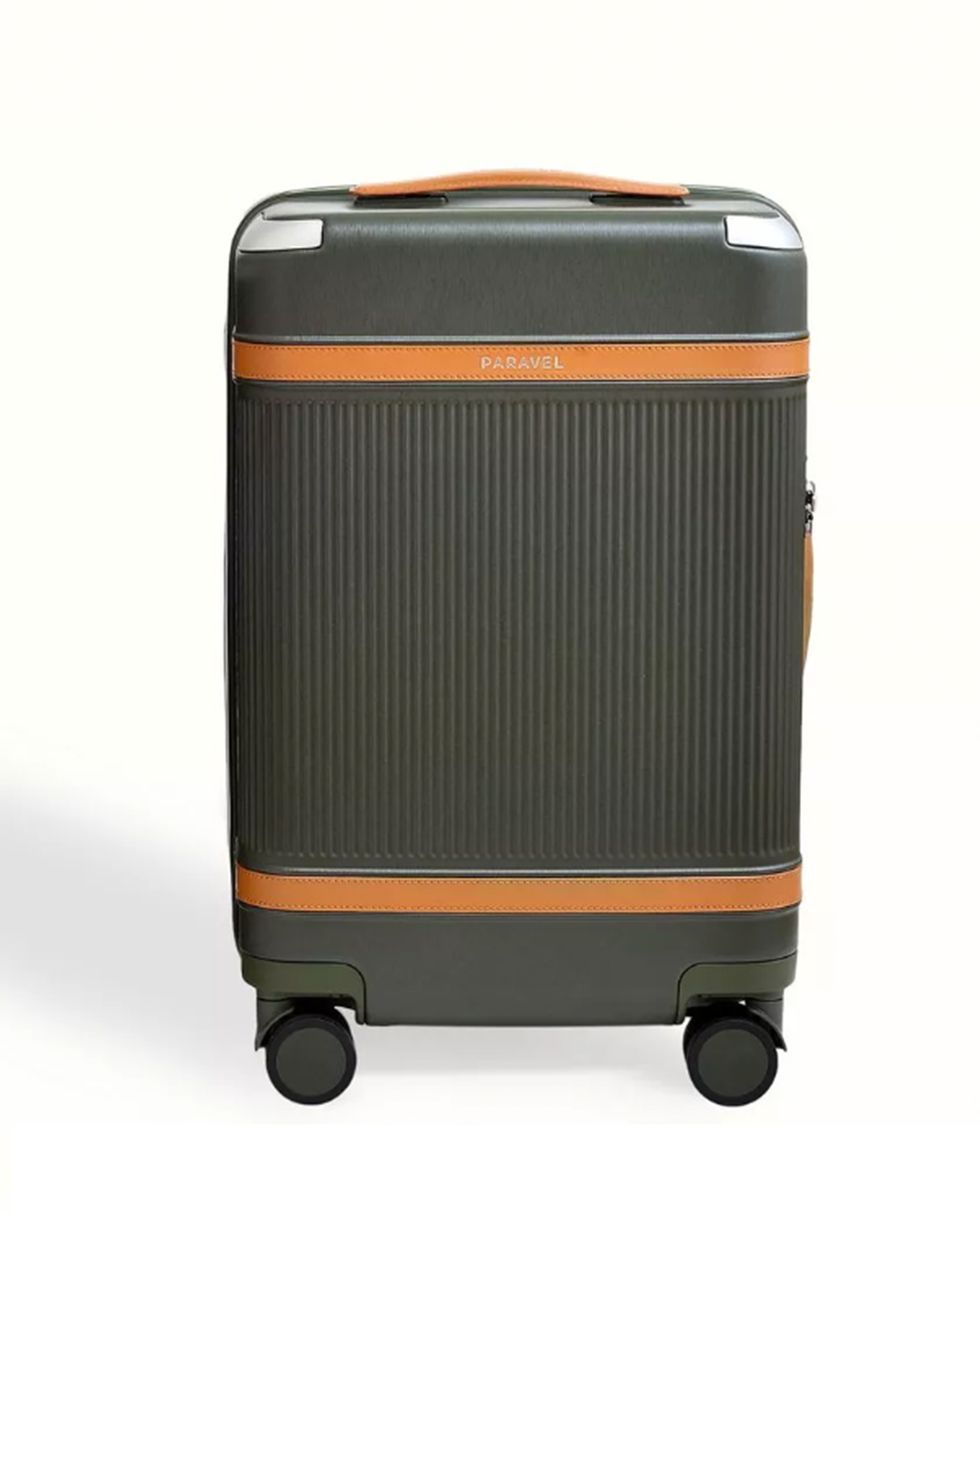 suitcase, hand luggage, luggage and bags, home appliance, baggage, rolling,